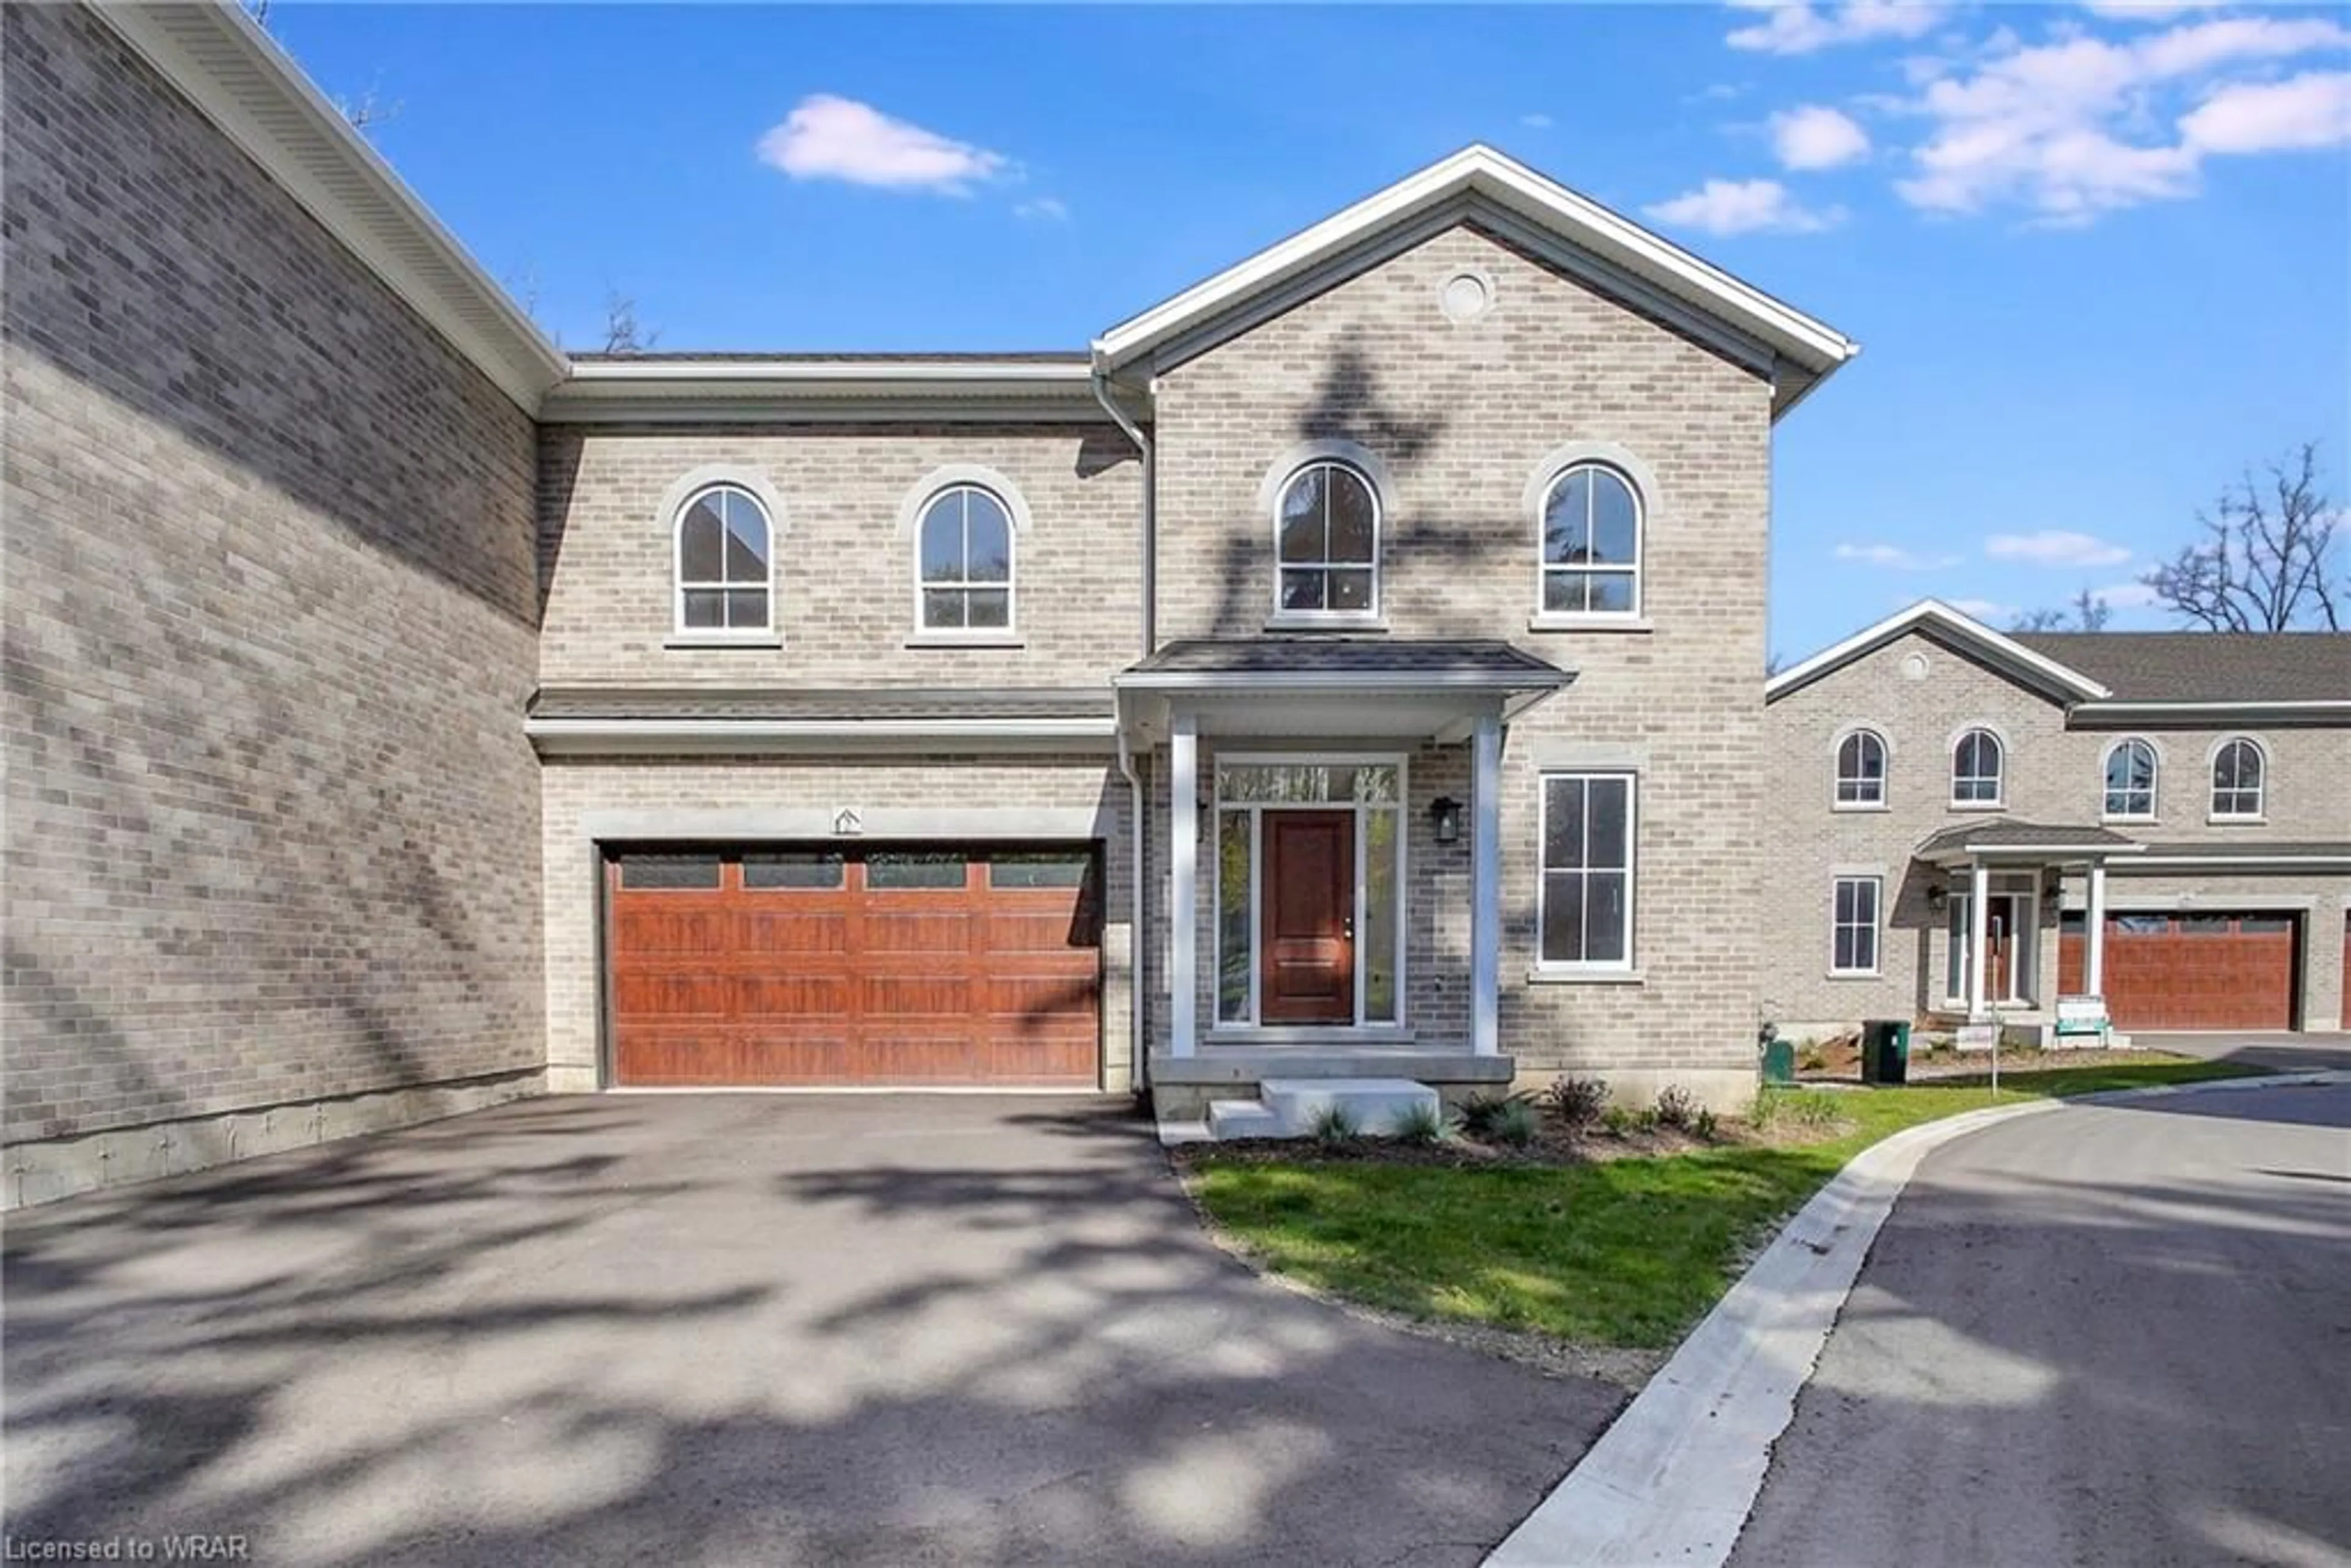 Home with brick exterior material for 45 Blair Rd #2, Cambridge Ontario N1S 2H8